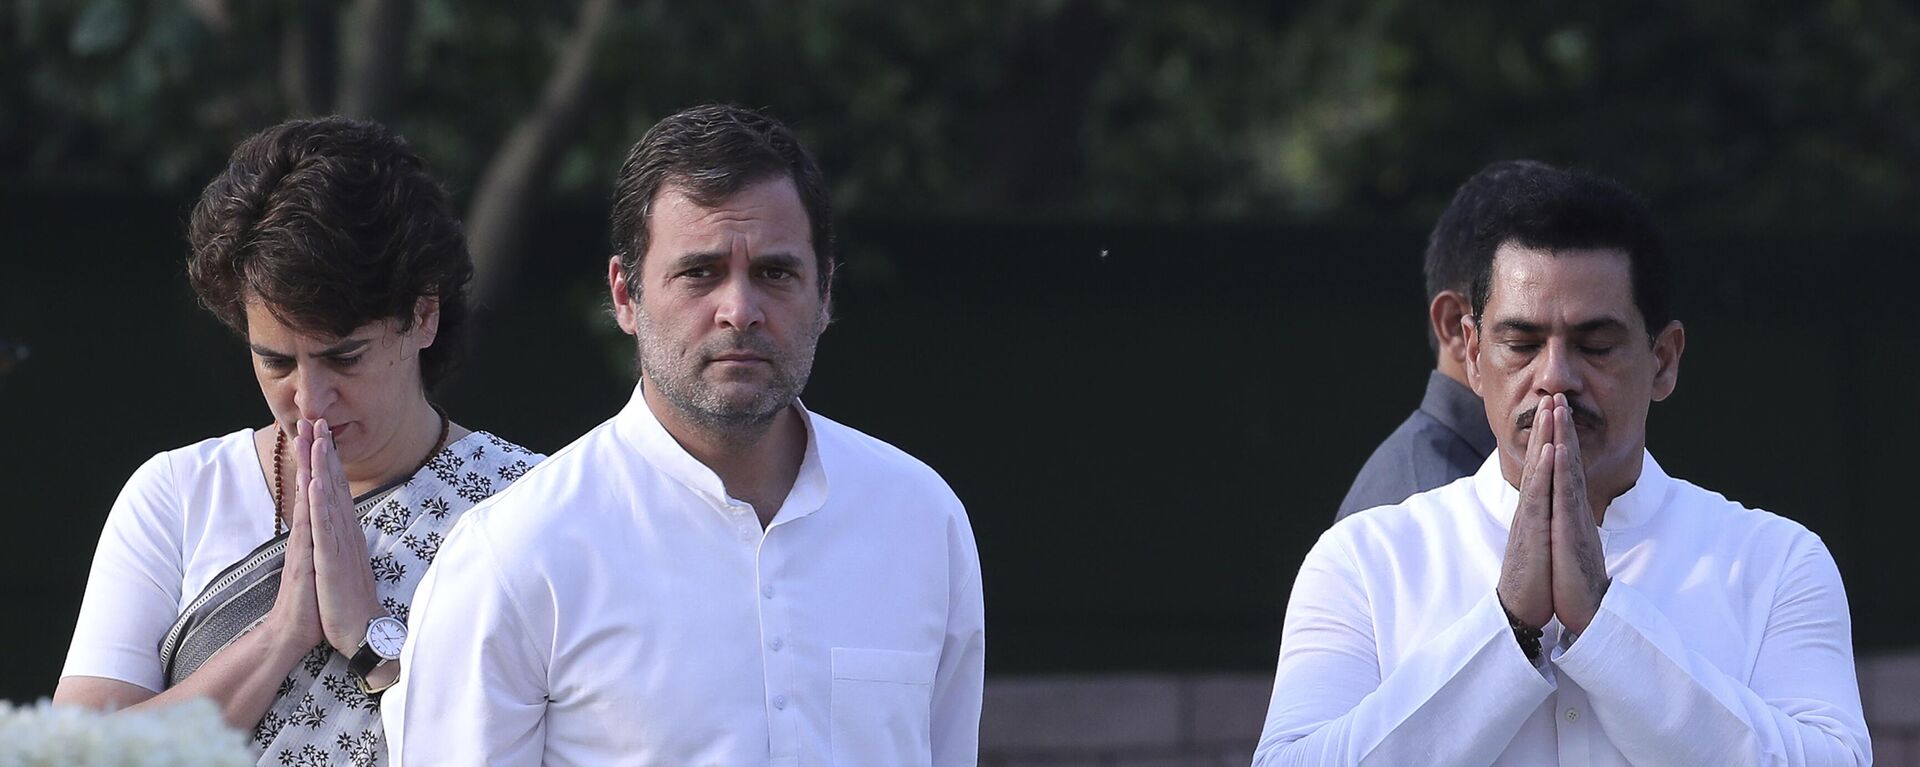 Congress Party former President Rahul Gandhi, center, looks as his sister and party General Secretary Priyanka Gandhi Vadra, left, and her husband Robert Vadra, as they pay homage to former Indian Prime Minister Rajiv Gandhi on his death anniversary in New Delhi, India, Tuesday, May 21, 2019. - Sputnik India, 1920, 09.01.2023